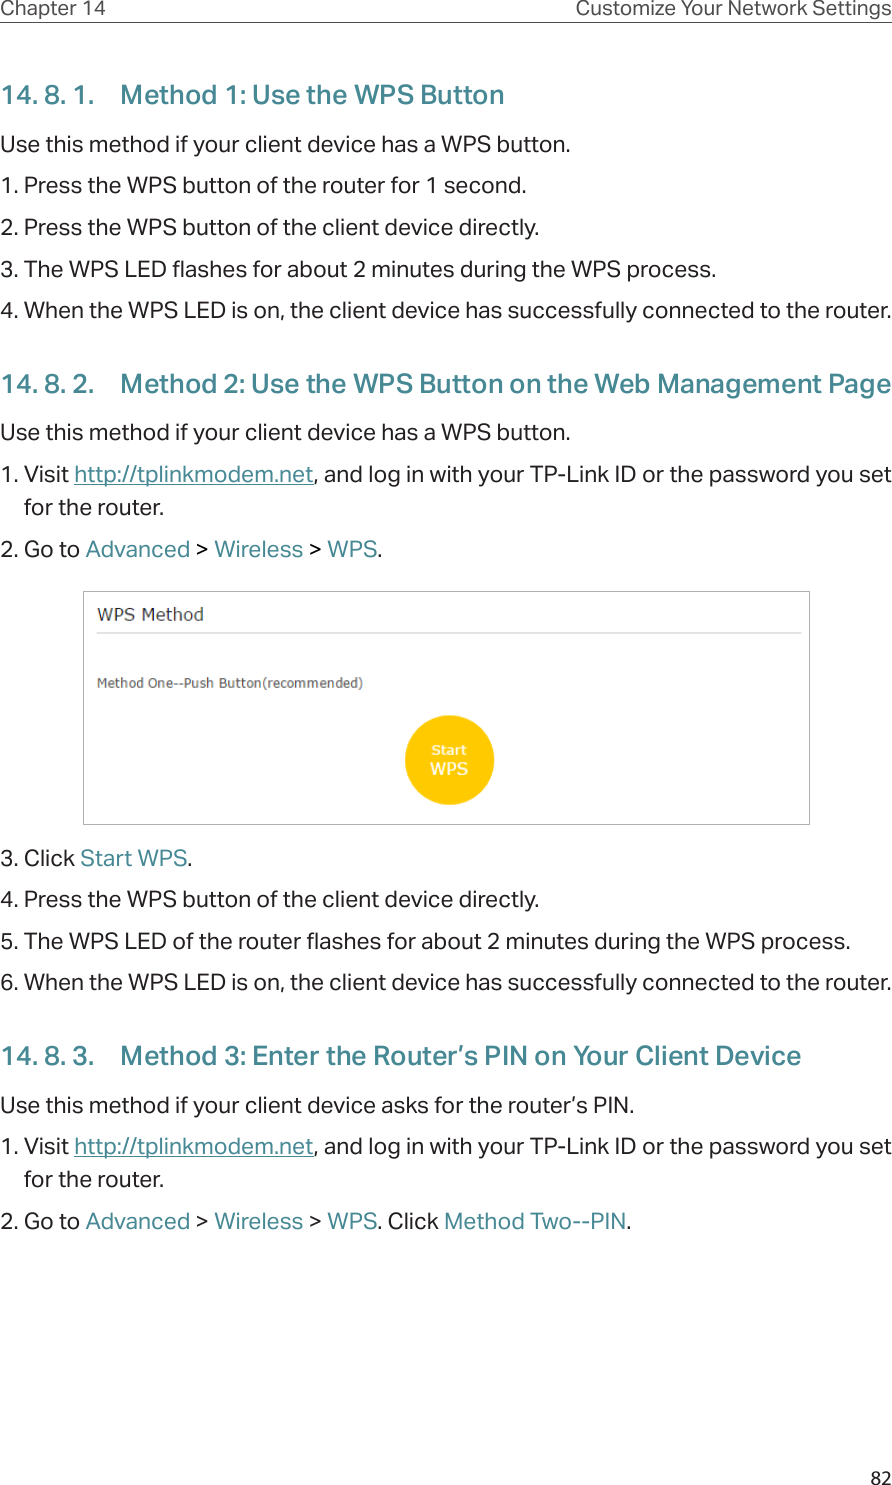 82Chapter 14 Customize Your Network Settings14. 8. 1.  Method 1: Use the WPS ButtonUse this method if your client device has a WPS button.1. Press the WPS button of the router for 1 second. 2. Press the WPS button of the client device directly. 3. The WPS LED flashes for about 2 minutes during the WPS process. 4. When the WPS LED is on, the client device has successfully connected to the router. 14. 8. 2.  Method 2: Use the WPS Button on the Web Management PageUse this method if your client device has a WPS button.1. Visit http://tplinkmodem.net, and log in with your TP-Link ID or the password you set for the router. 2. Go to Advanced &gt; Wireless &gt; WPS.3. Click Start WPS.4. Press the WPS button of the client device directly. 5. The WPS LED of the router flashes for about 2 minutes during the WPS process. 6. When the WPS LED is on, the client device has successfully connected to the router. 14. 8. 3.  Method 3: Enter the Router’s PIN on Your Client DeviceUse this method if your client device asks for the router’s PIN. 1. Visit http://tplinkmodem.net, and log in with your TP-Link ID or the password you set for the router. 2. Go to Advanced &gt; Wireless &gt; WPS. Click Method Two--PIN.